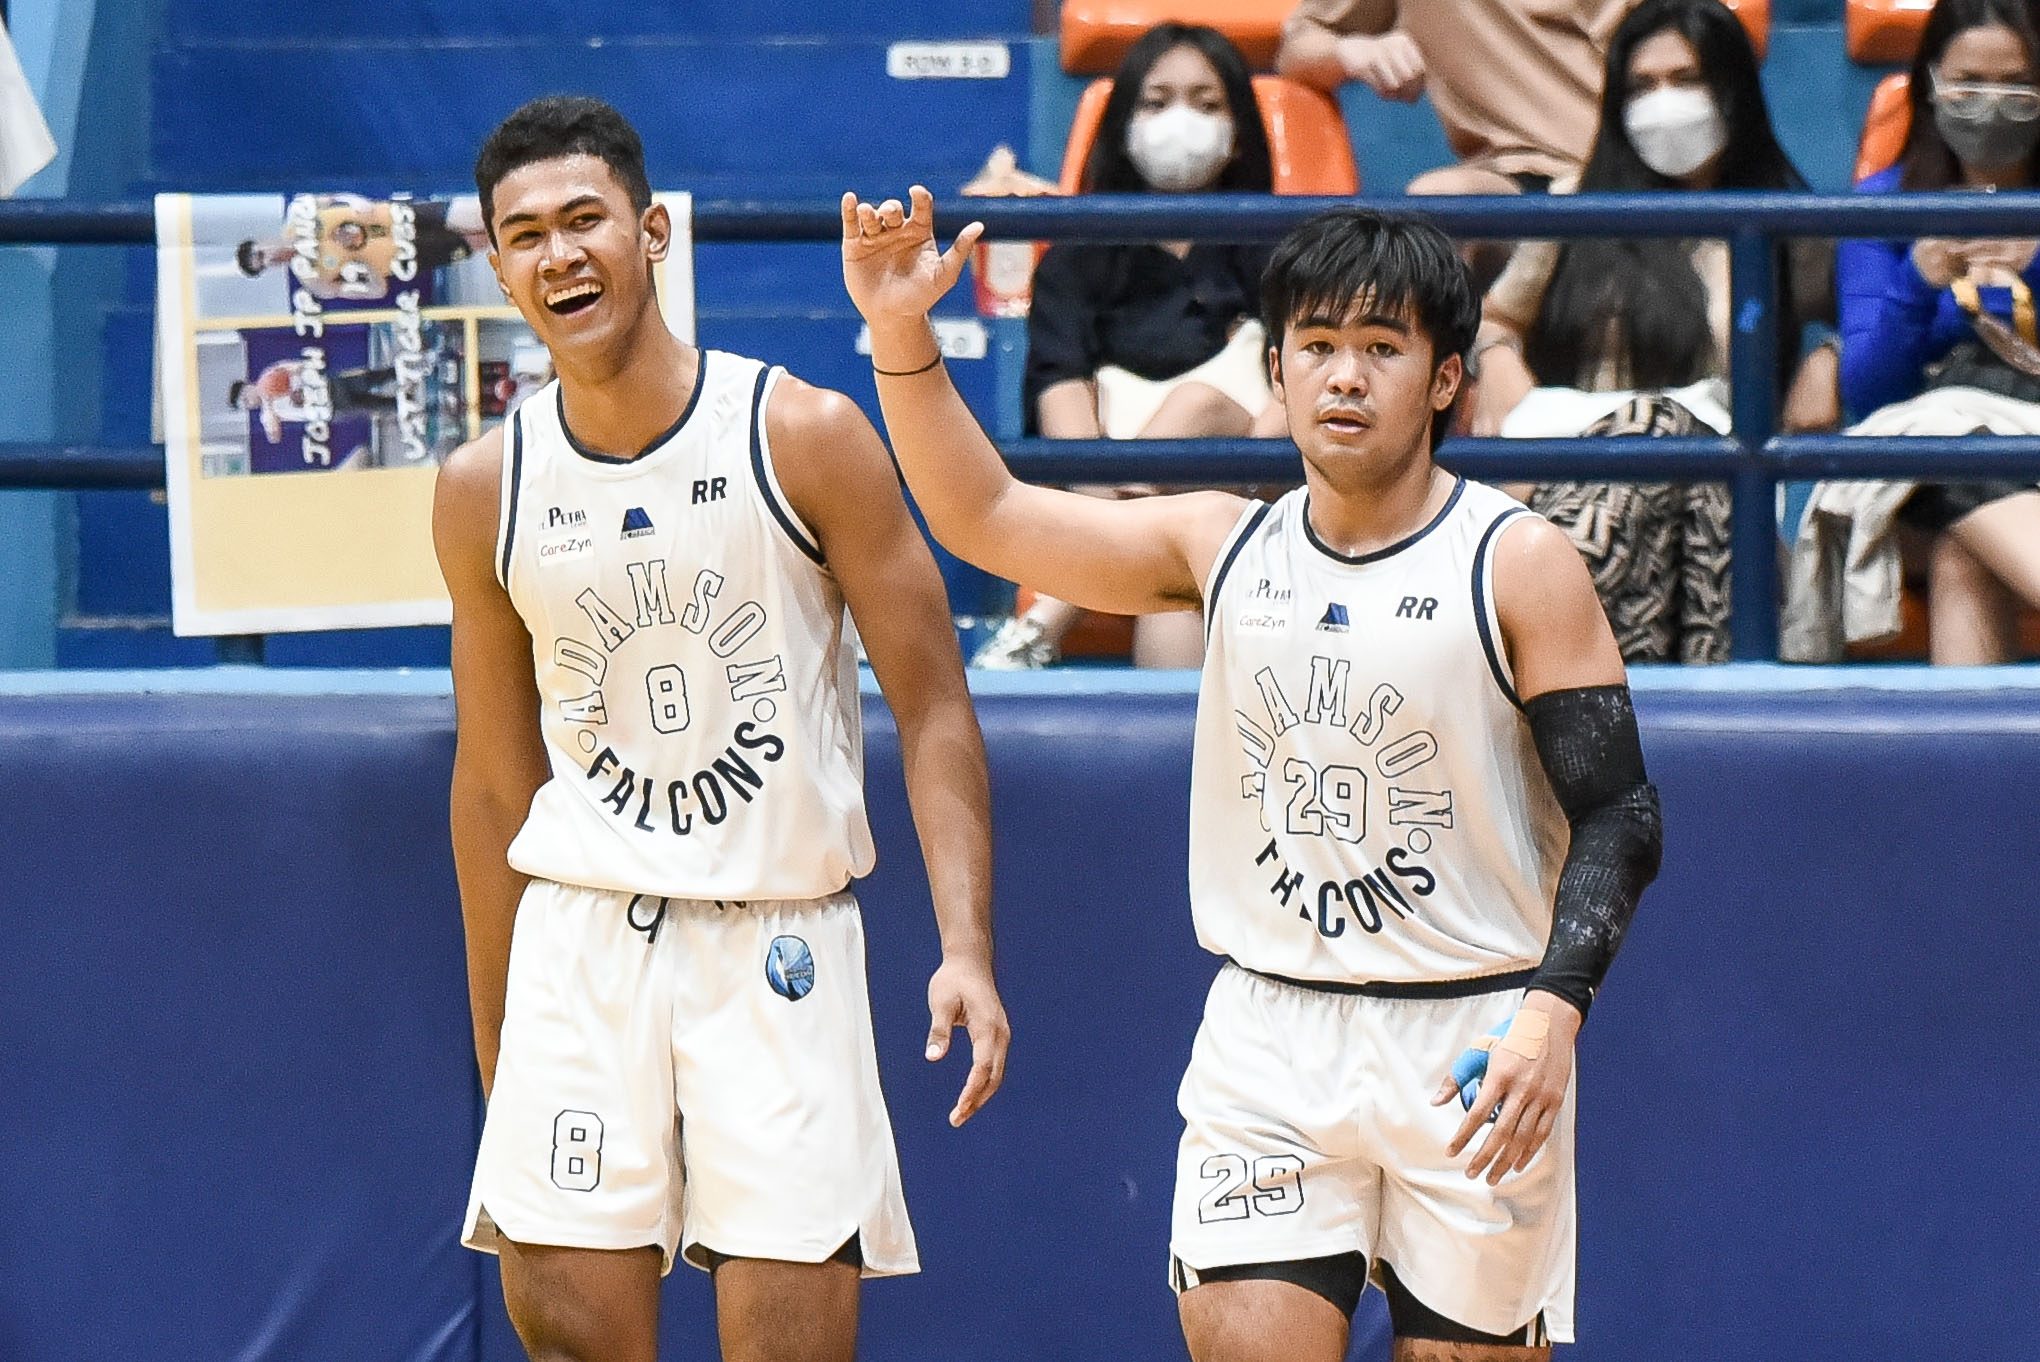 Adamson clinches UAAP HS hoops top seed; FEU reasserts mastery over NU for No. 2